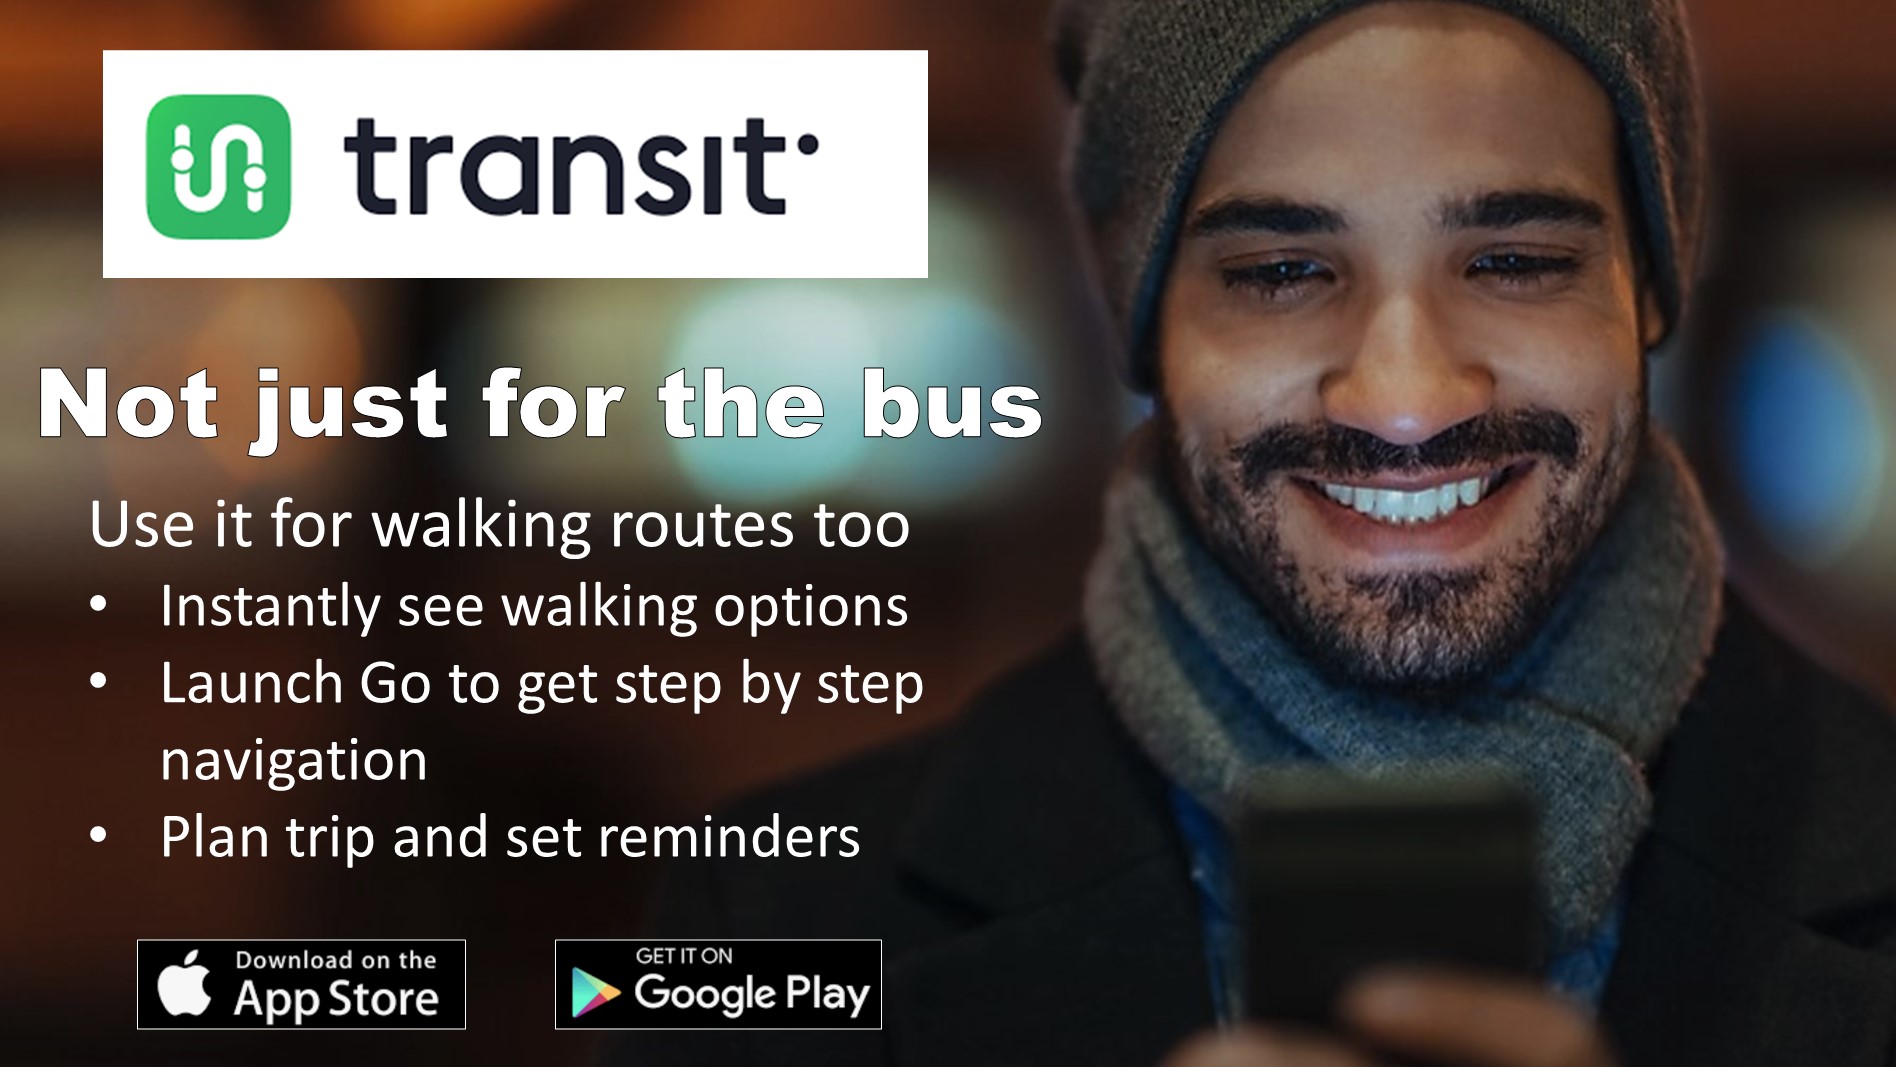 Transit app can be used for walking routes